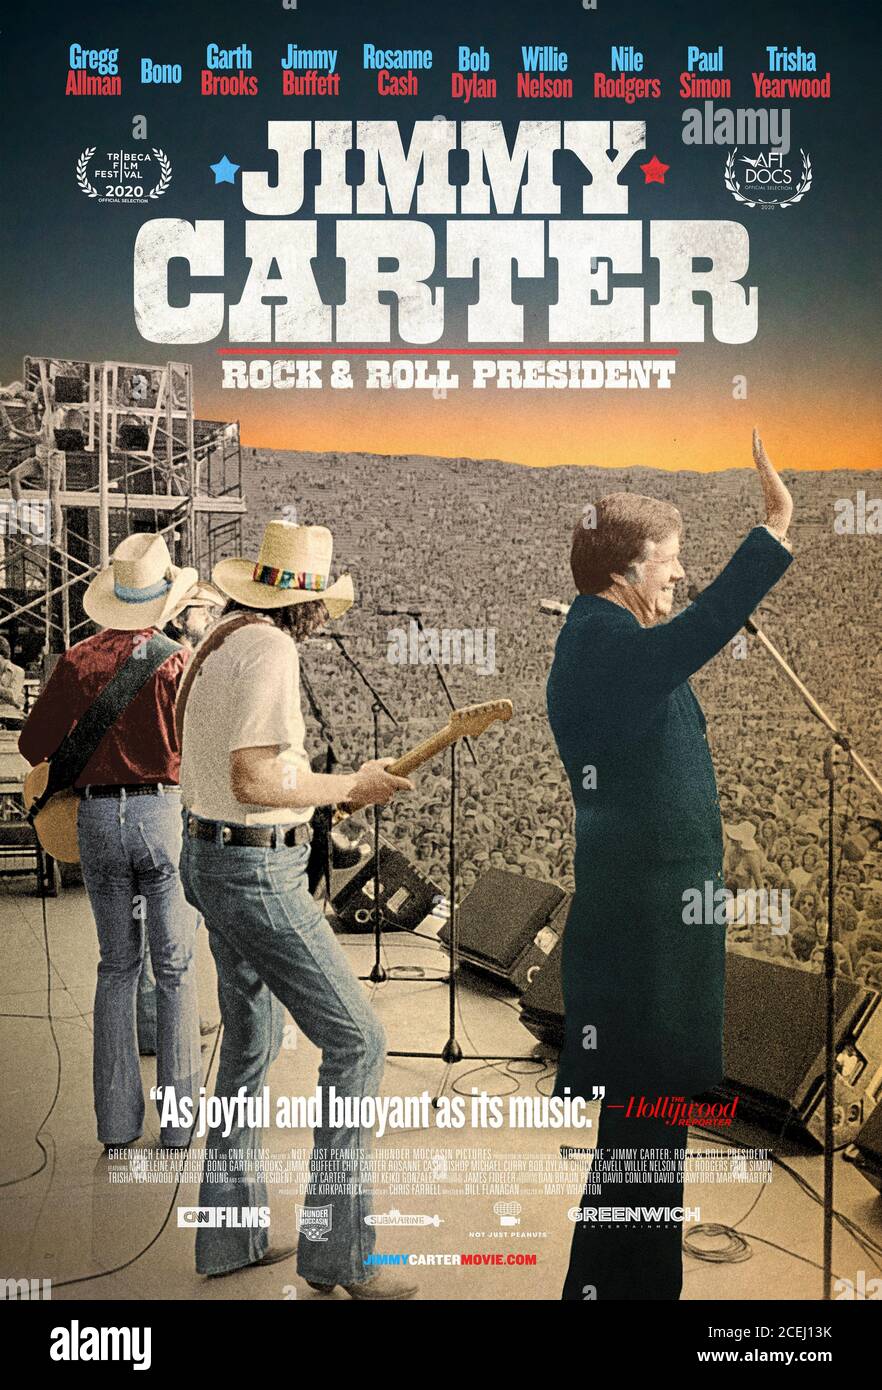 Jimmy Carter: Rock & Roll President (2020) directed by Mary Wharton and starring Madeleine Albright, Tom Beard, Bono and Garth Brooks. Documentary featuring interviews with musicians who formed close friendships with Jimmy Carter on the campaign trail to becoming the 39th President of the United States. Stock Photo